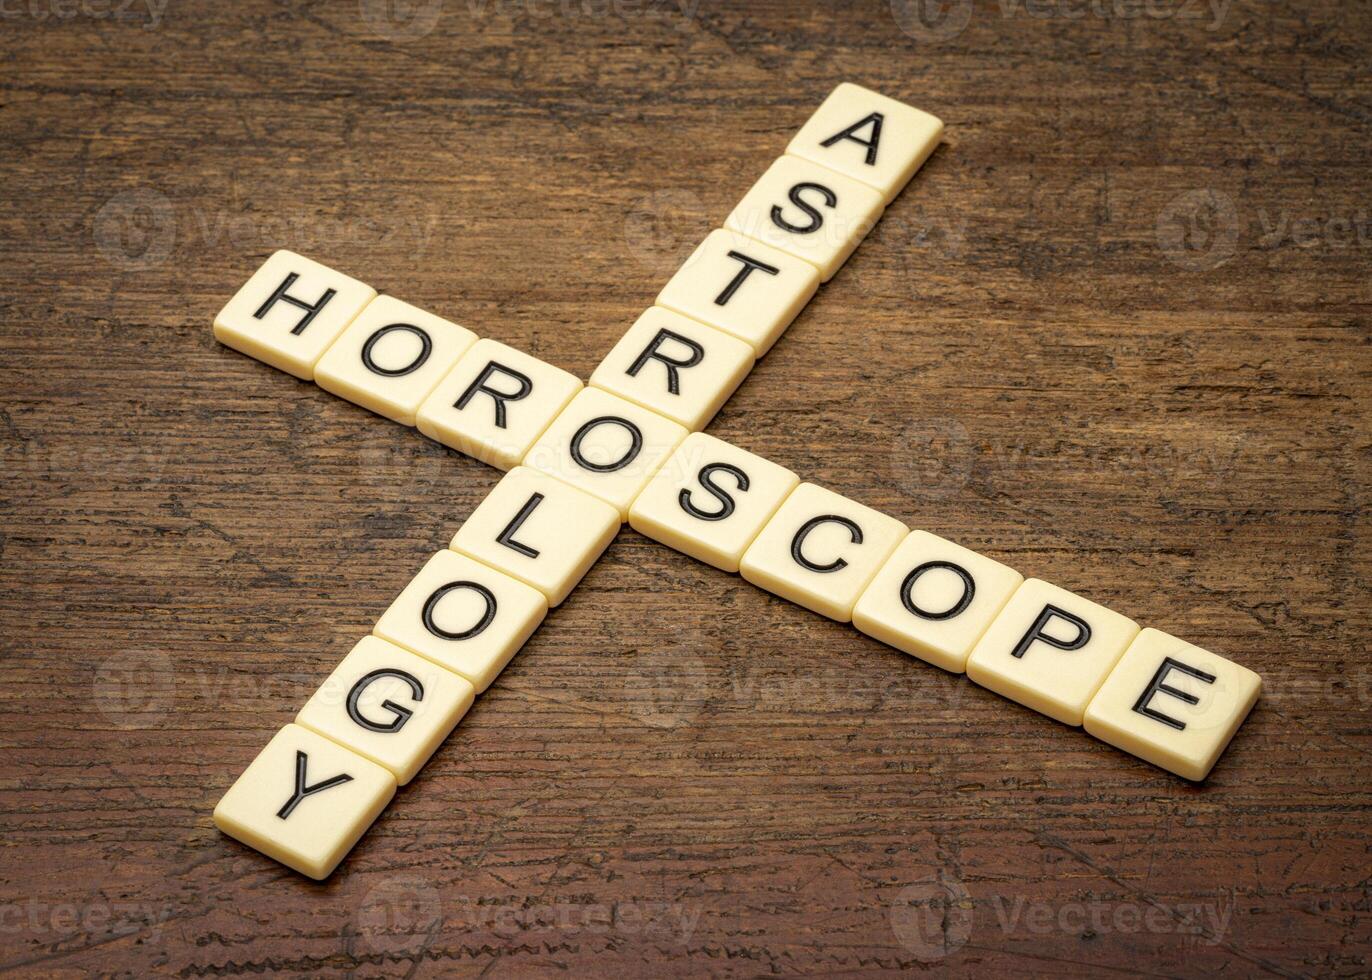 astrology and horoscope crossword in ivory letter tiles against rustic weathered wood photo